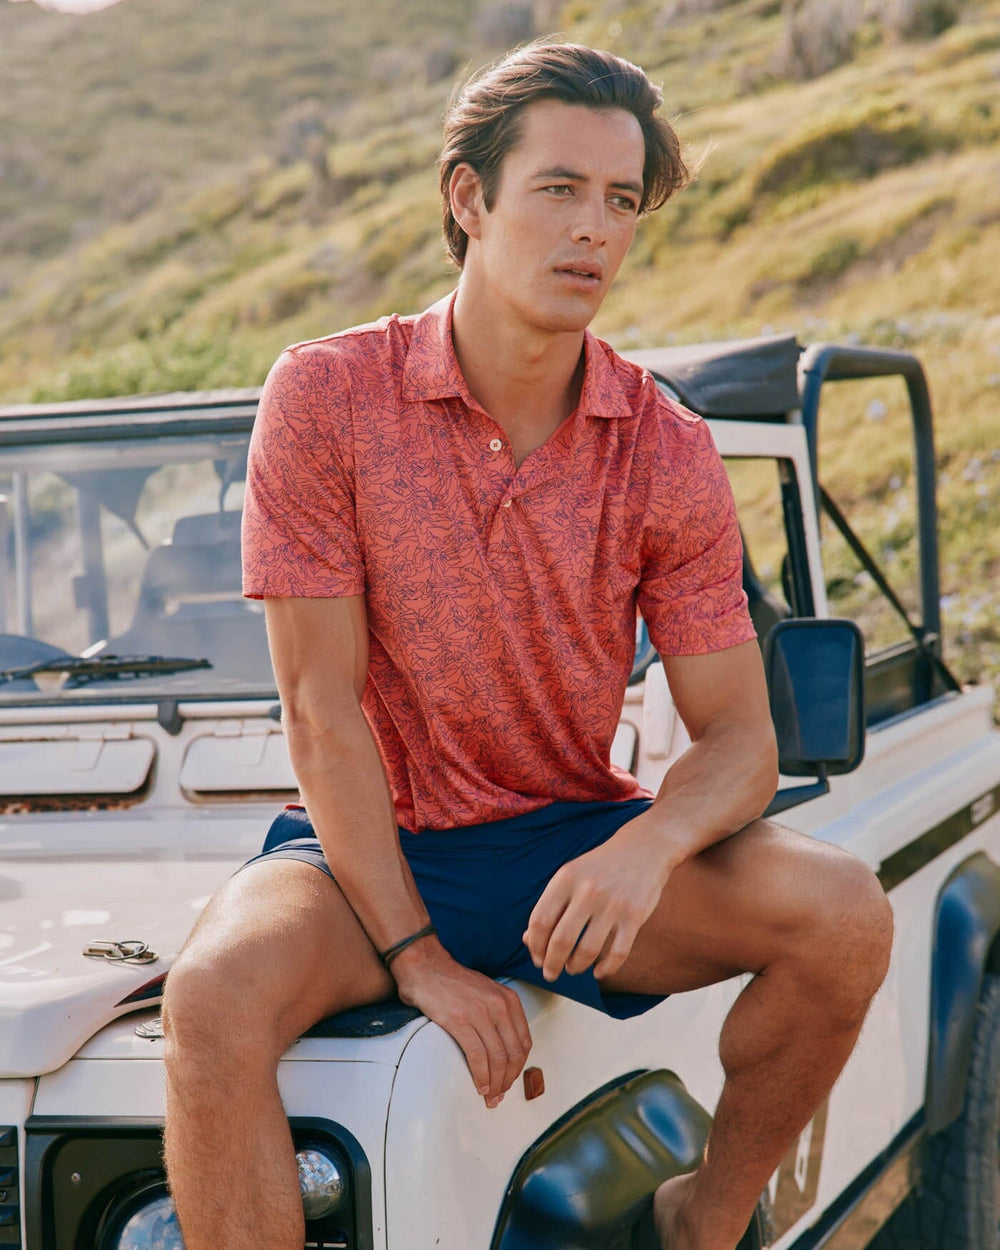 The front view of the Southern Tide Driver Dive In Polo Shirt by Southern Tide - Teaberry Pink